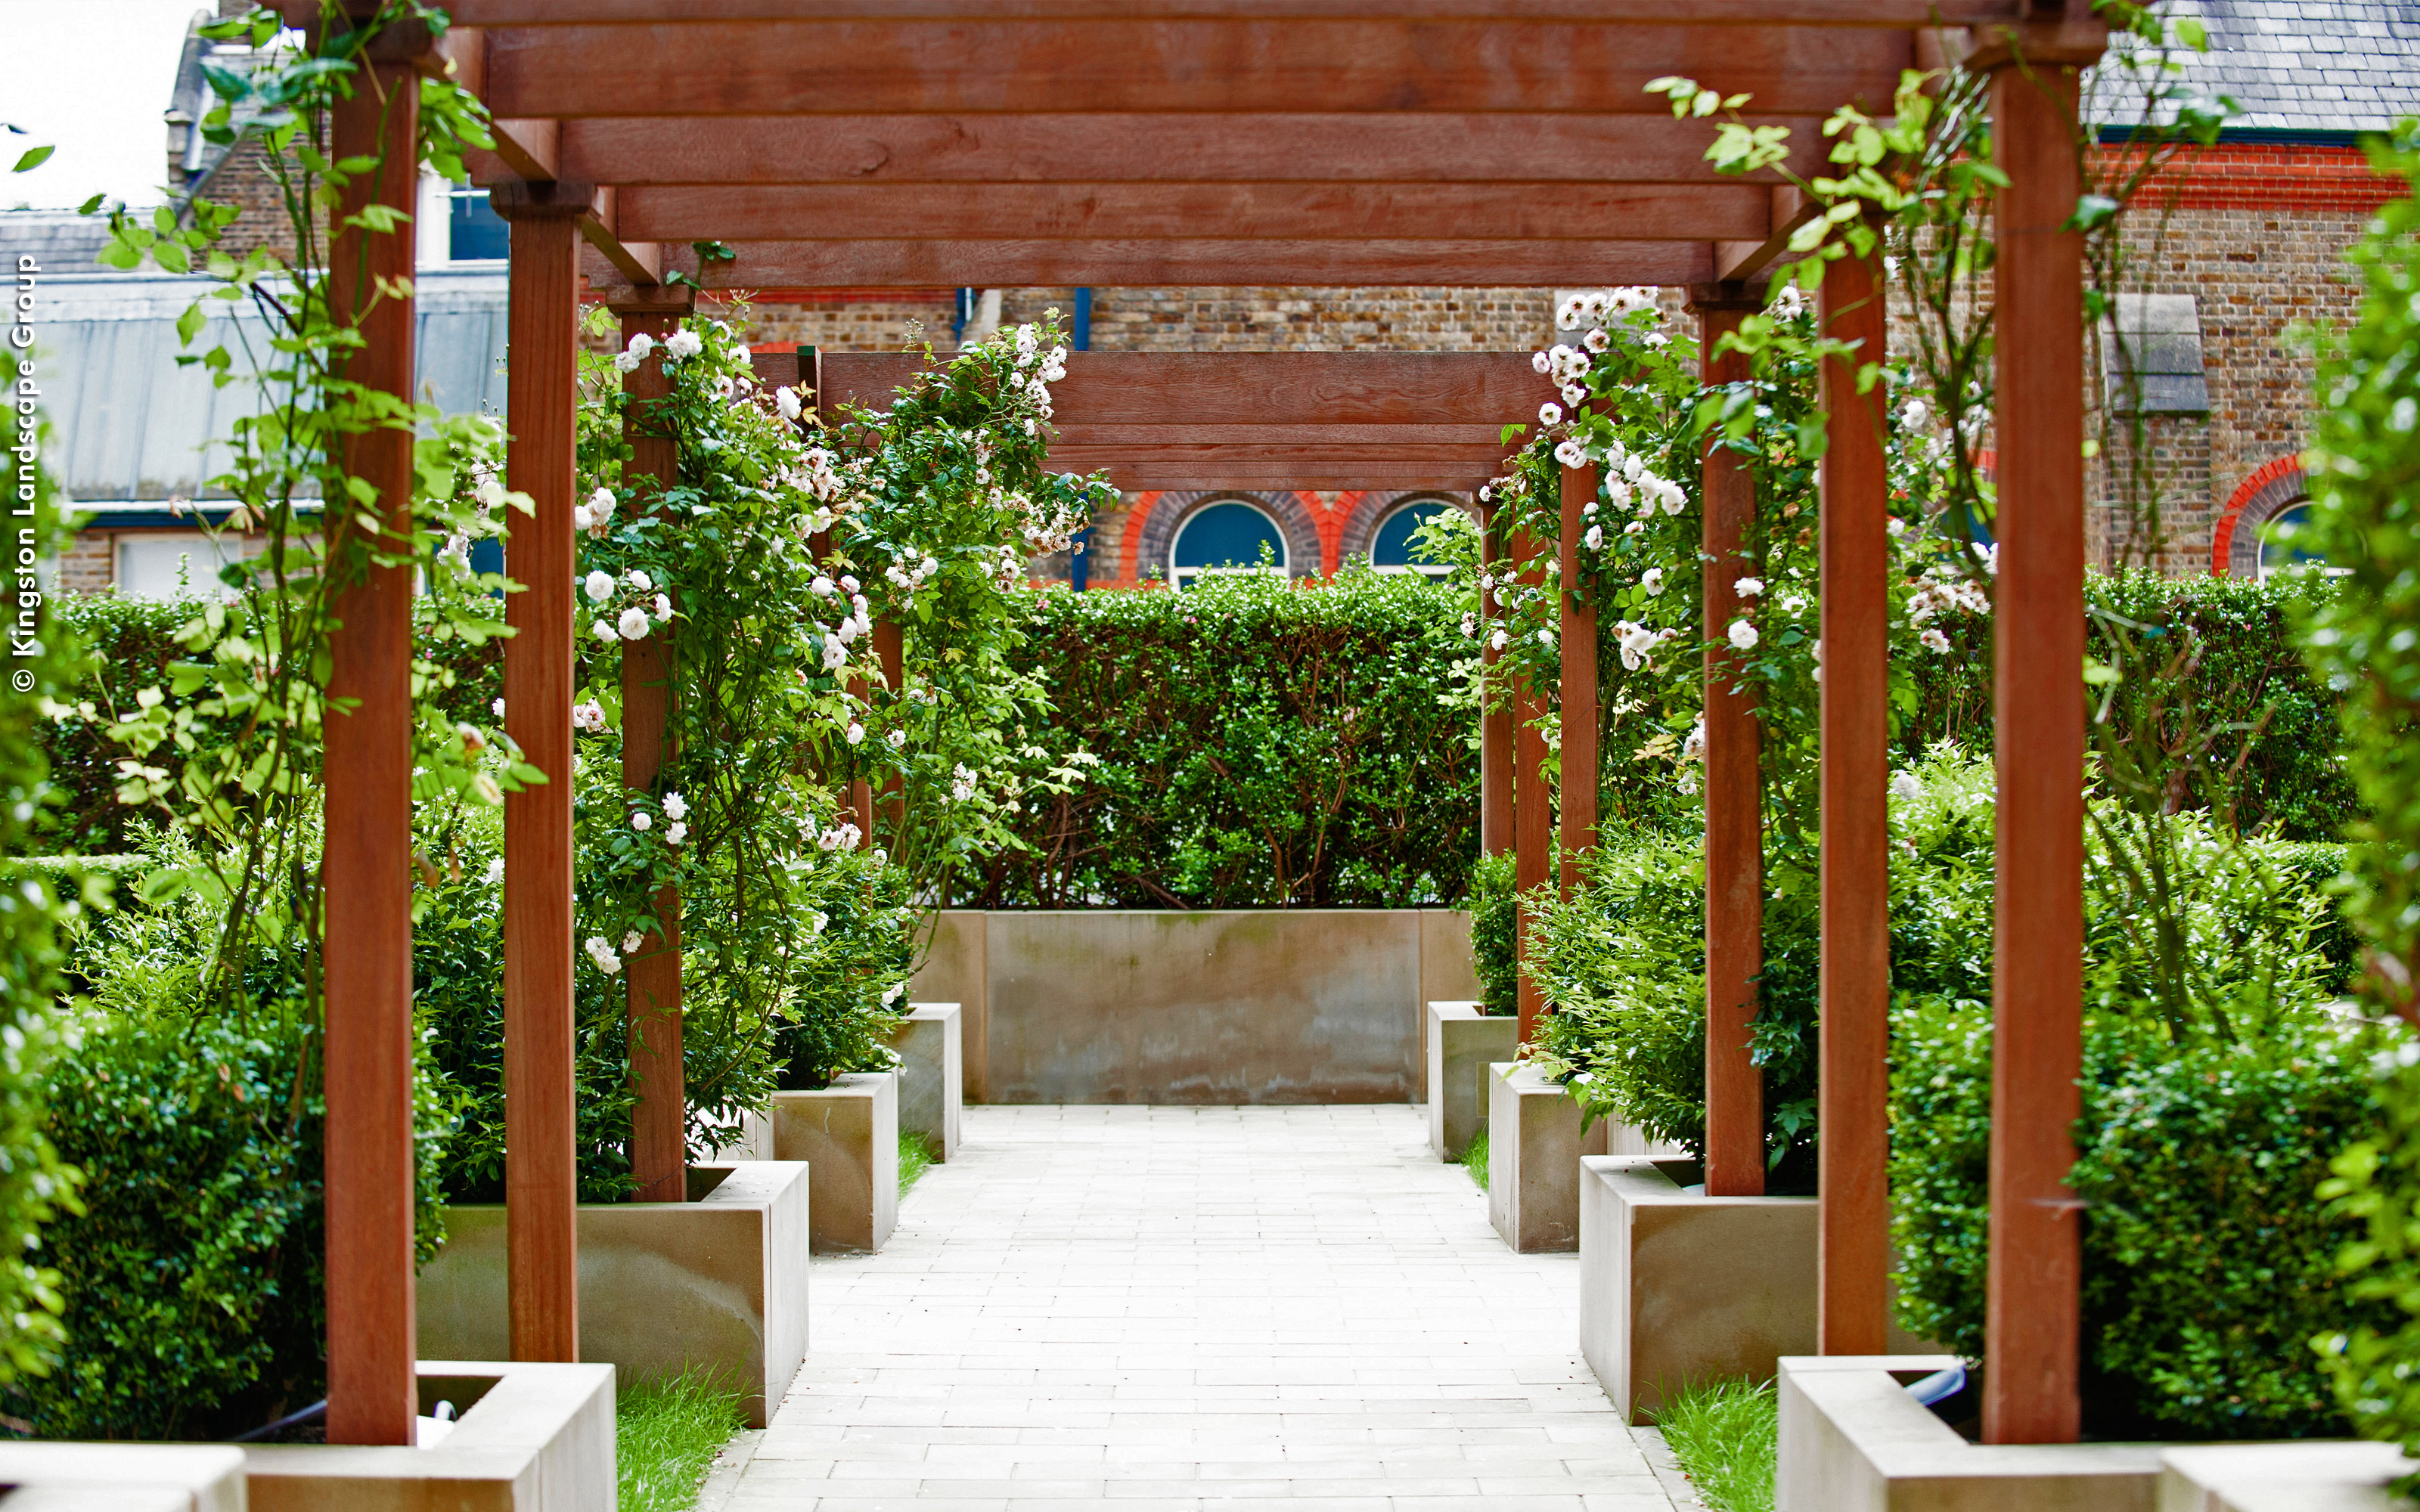 A wooden pergola with creepers and planters